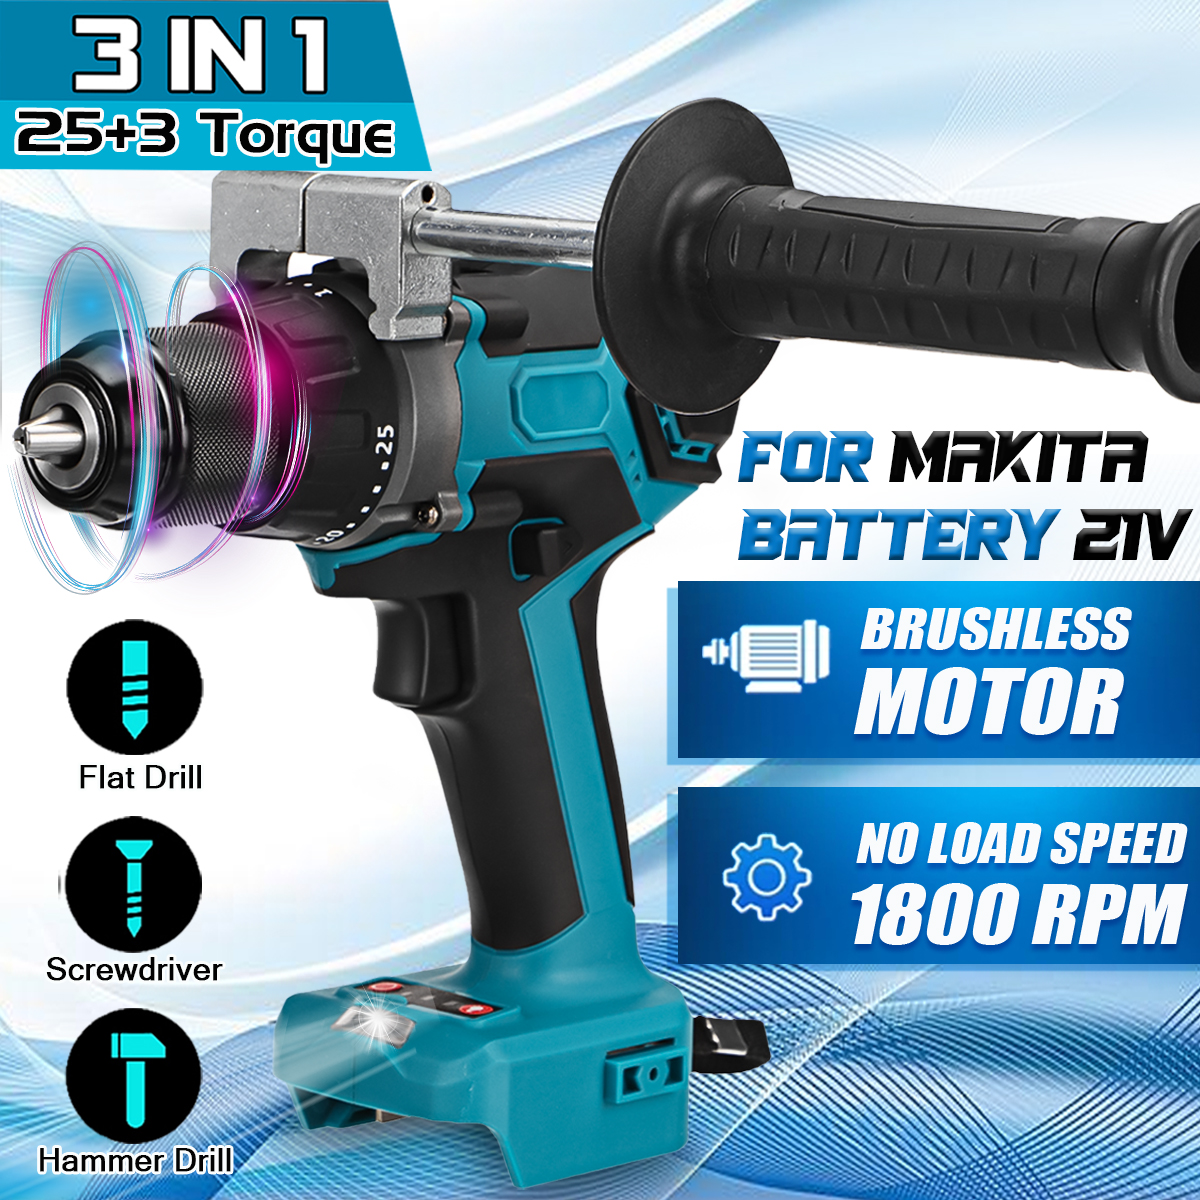 3-IN-1-Brushless-Electric-Hammer-Drill-Screwdriver-13mm-253-Torque-Cordless-Impact-Drill-For-Makita--1861682-2